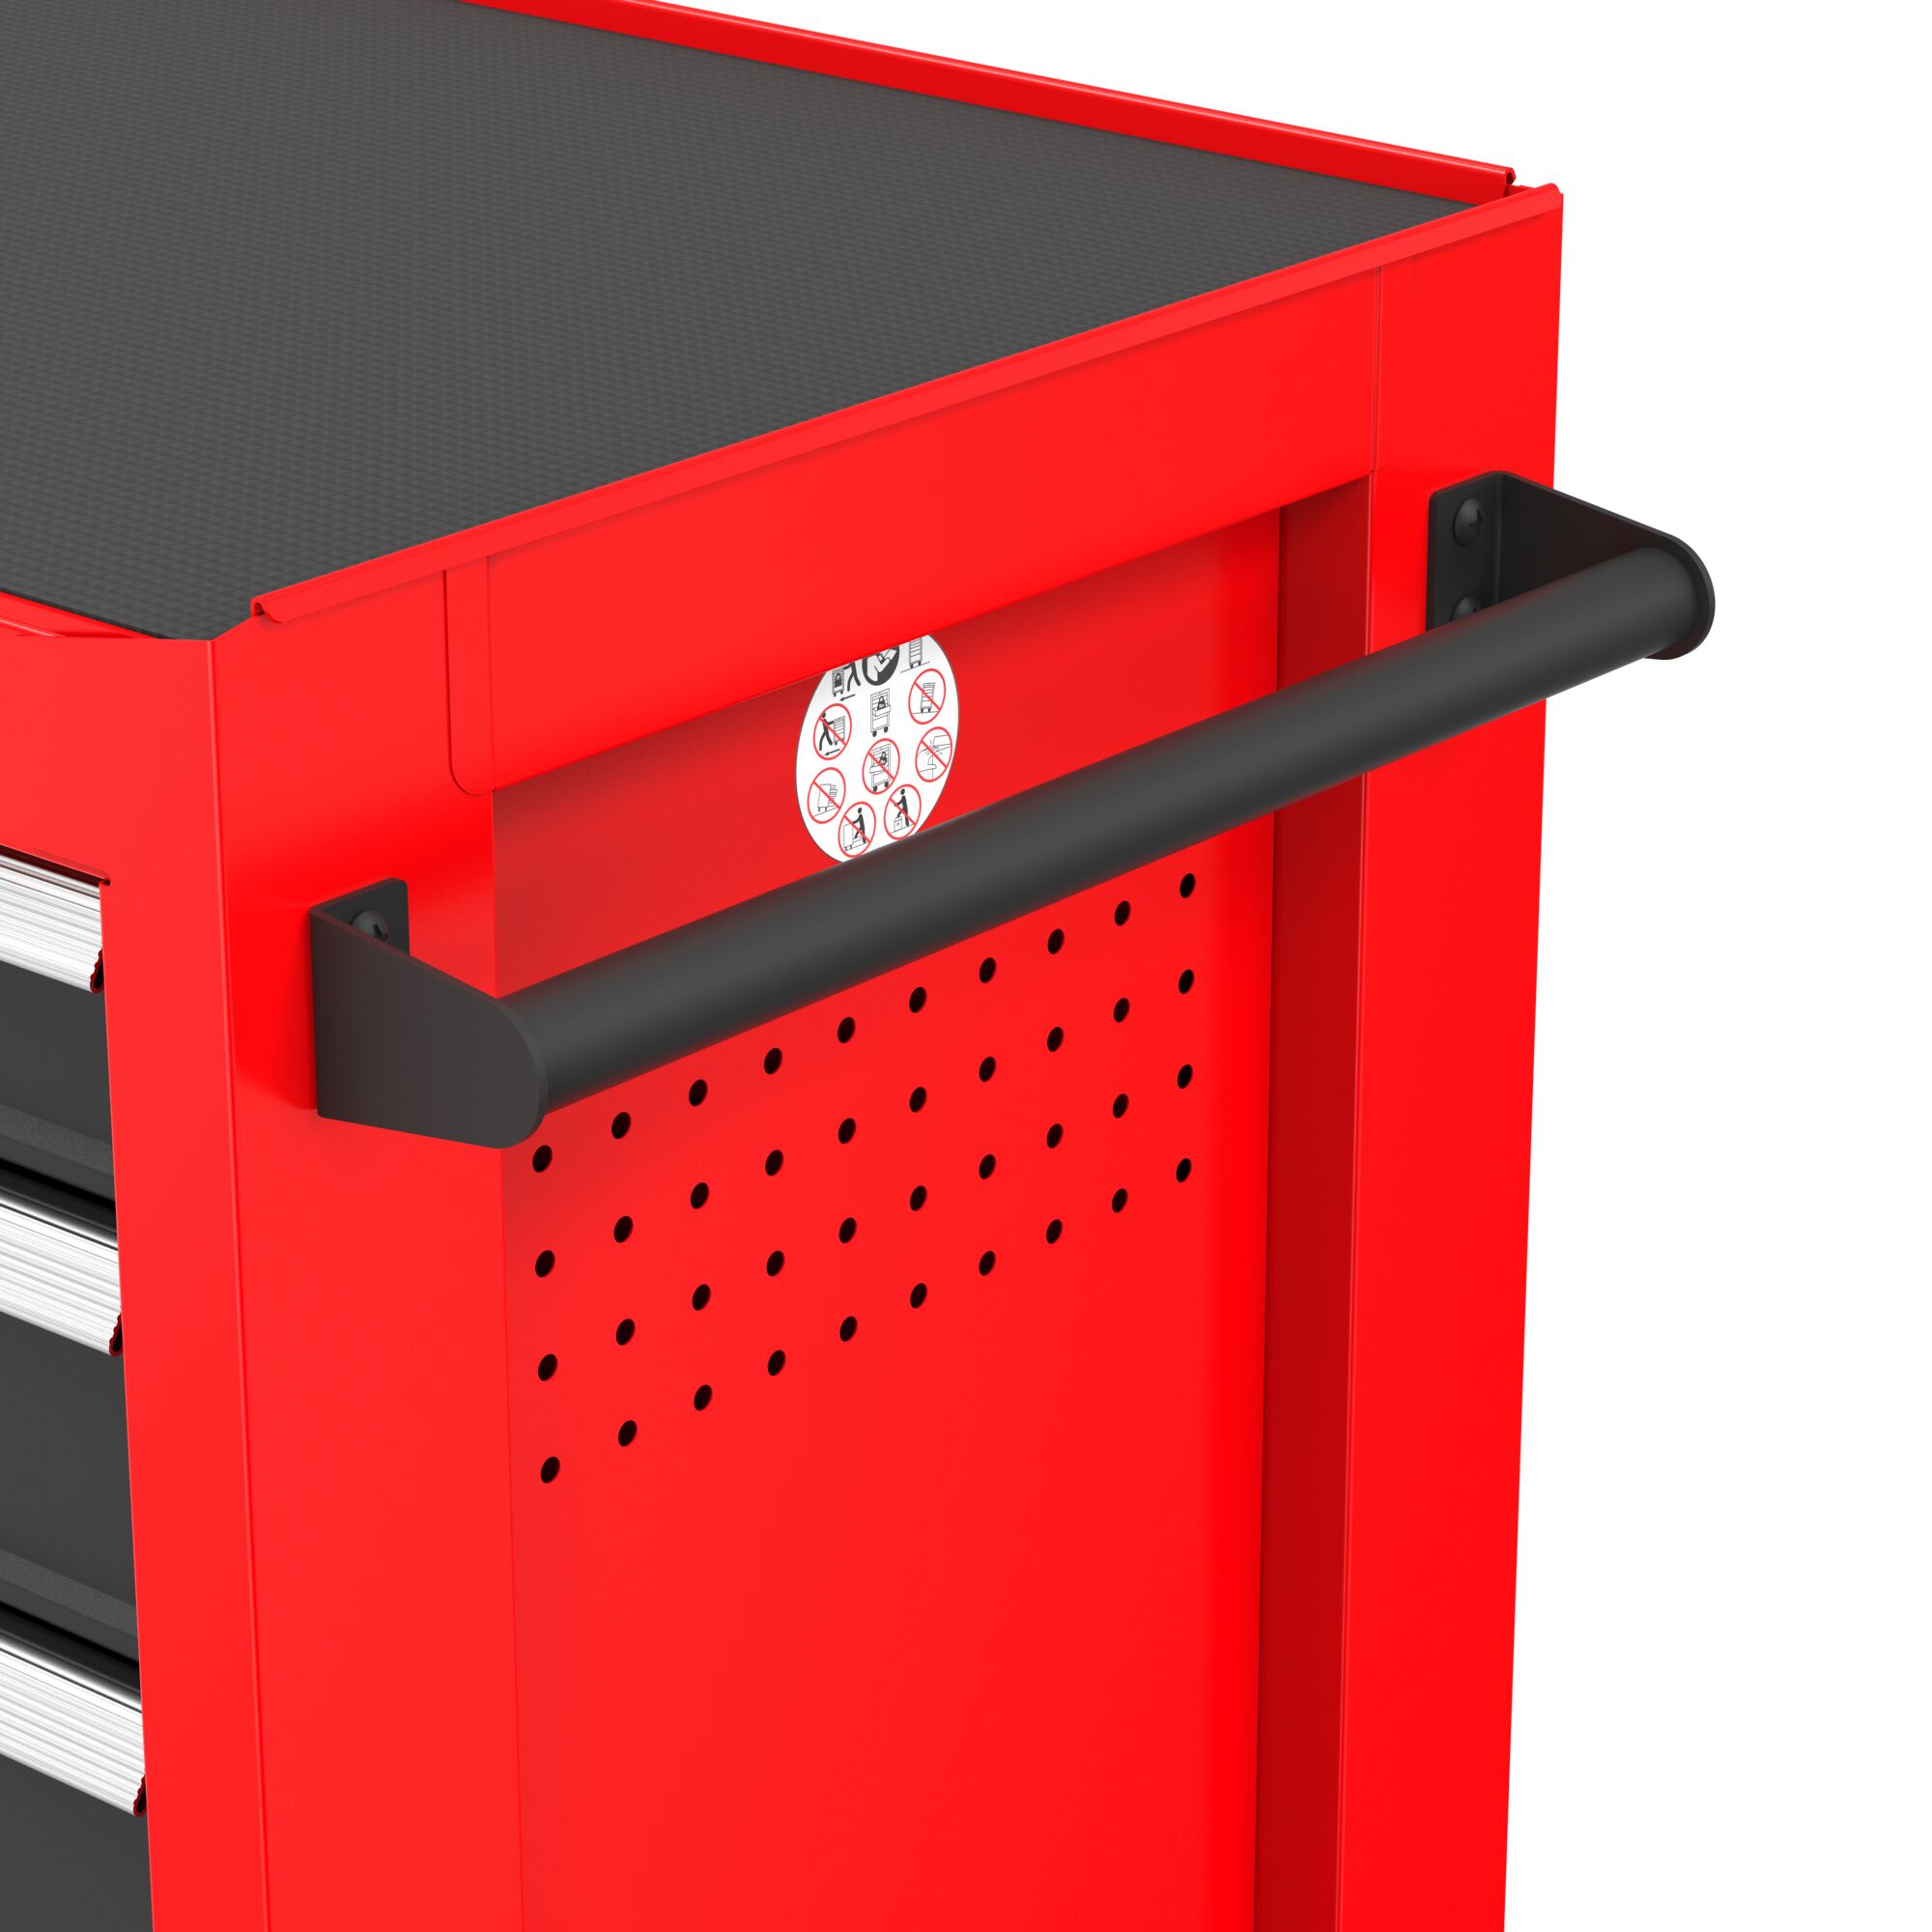 Tubular side handle feature of 41 inch 10 drawer rolling tool cabinet.